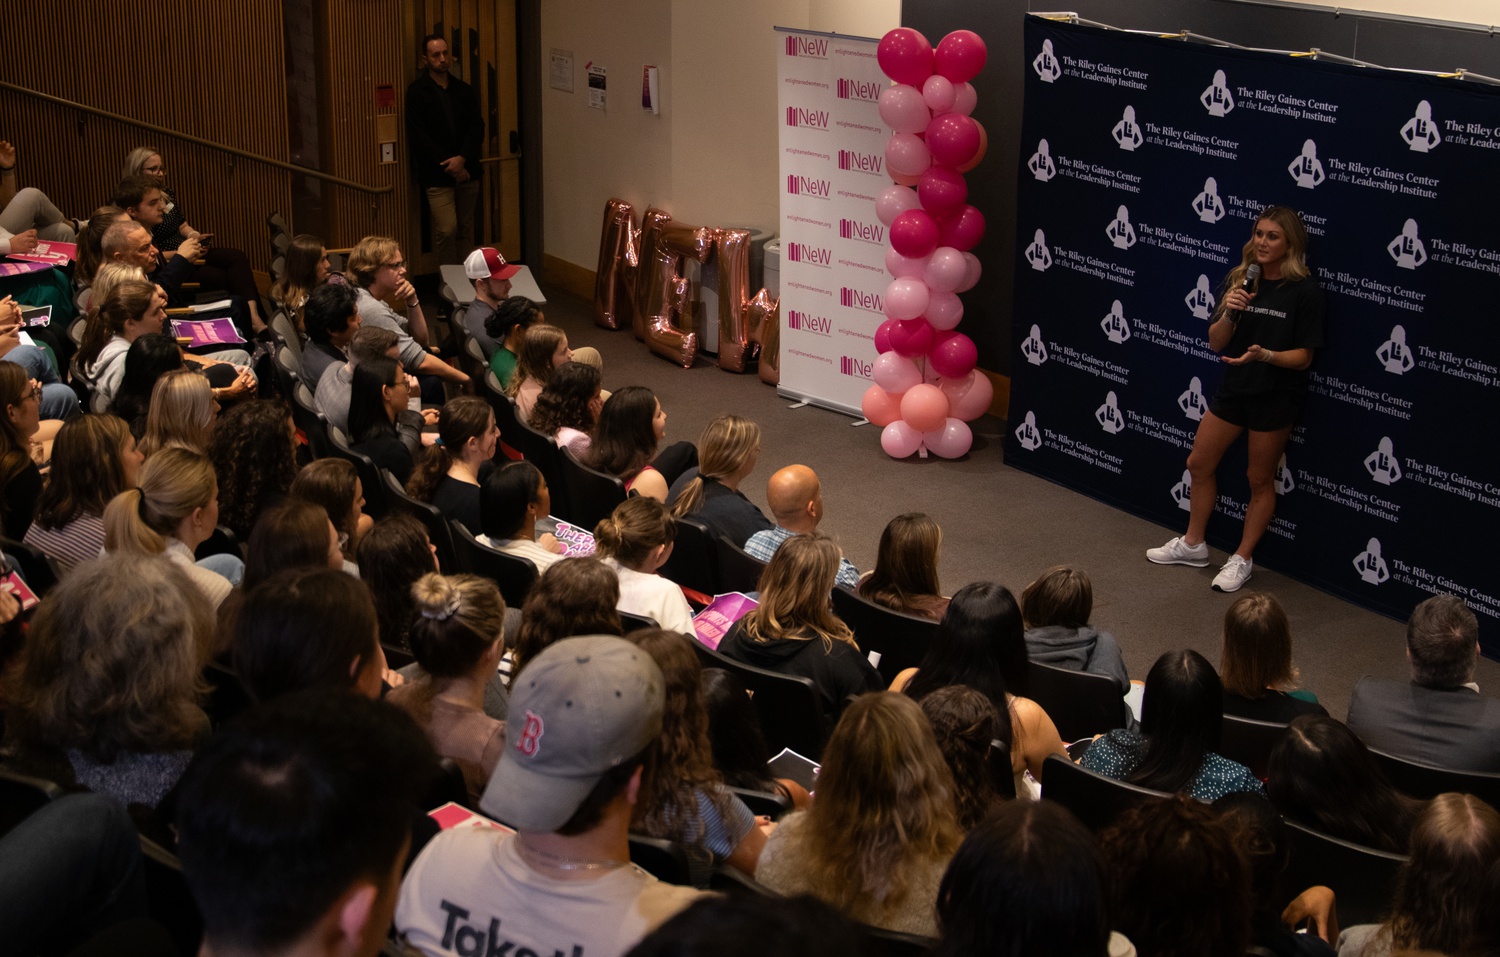 Riley Gaines, who has advocated against the participation of transgender women in women's sports, spoke at an event in Boylston Hall.